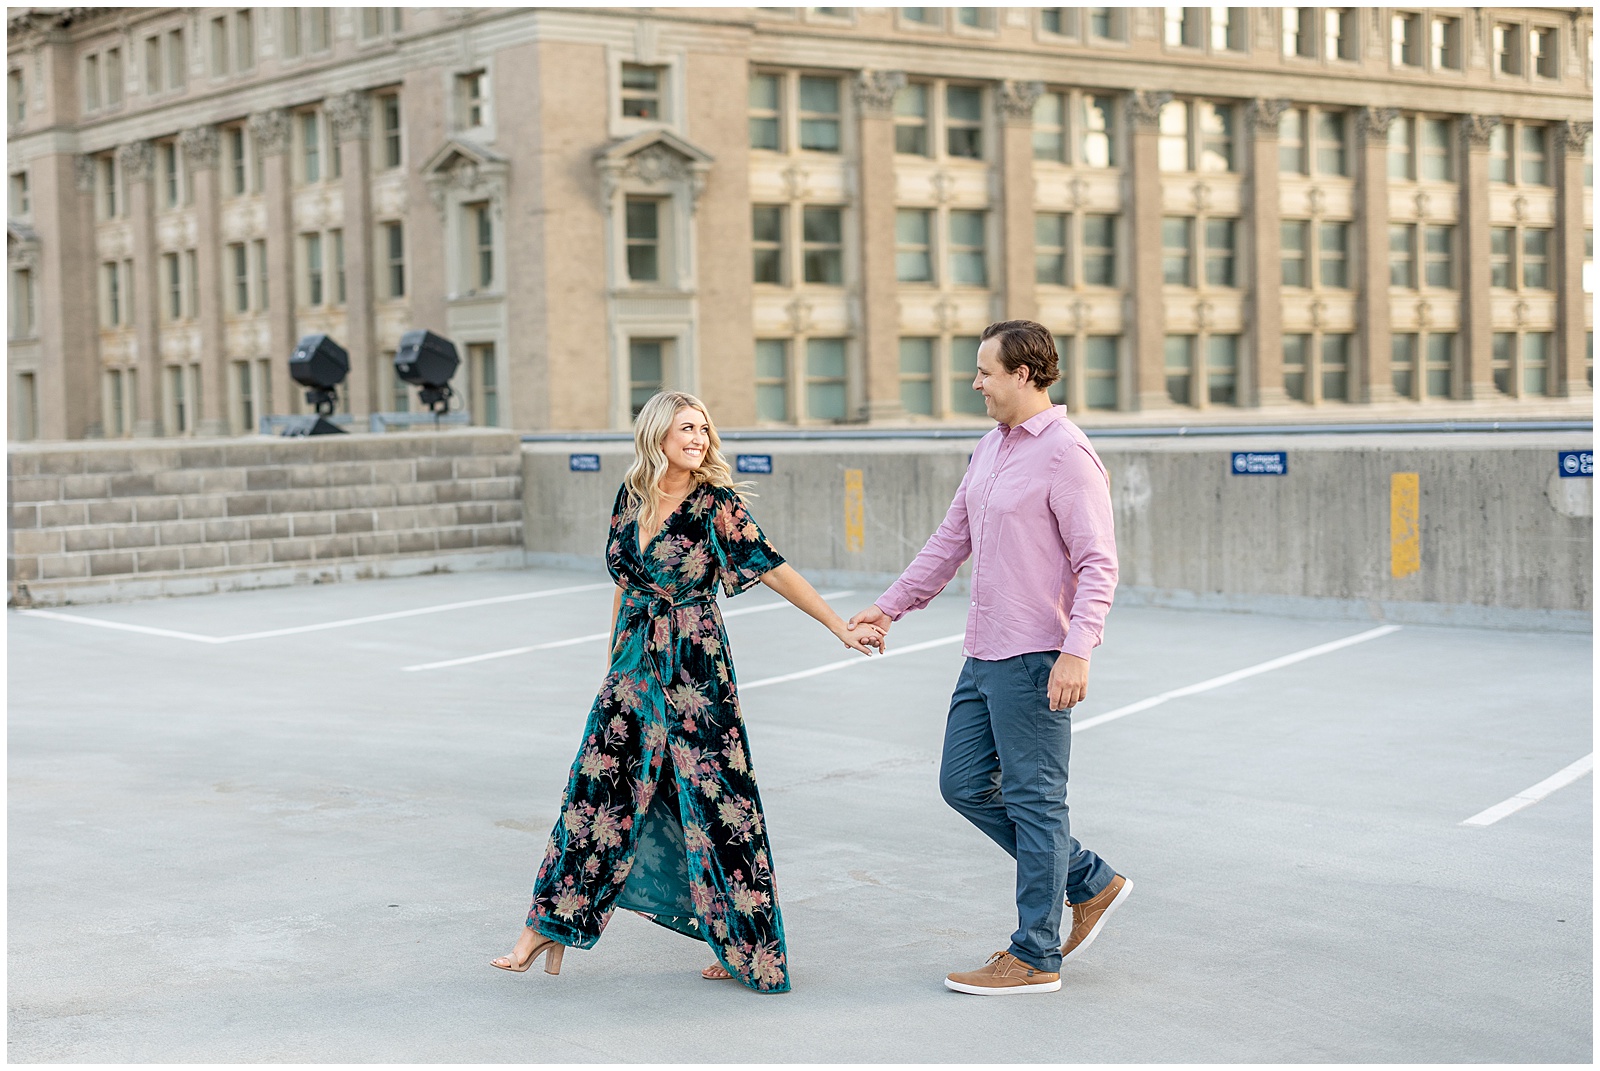 Omaha engagement session,downtown omaha engagement session,downtown omaha session,omaha engagement photographer,omaha wedding photographer,ted and wally's engagement session. ice cream engagement session,